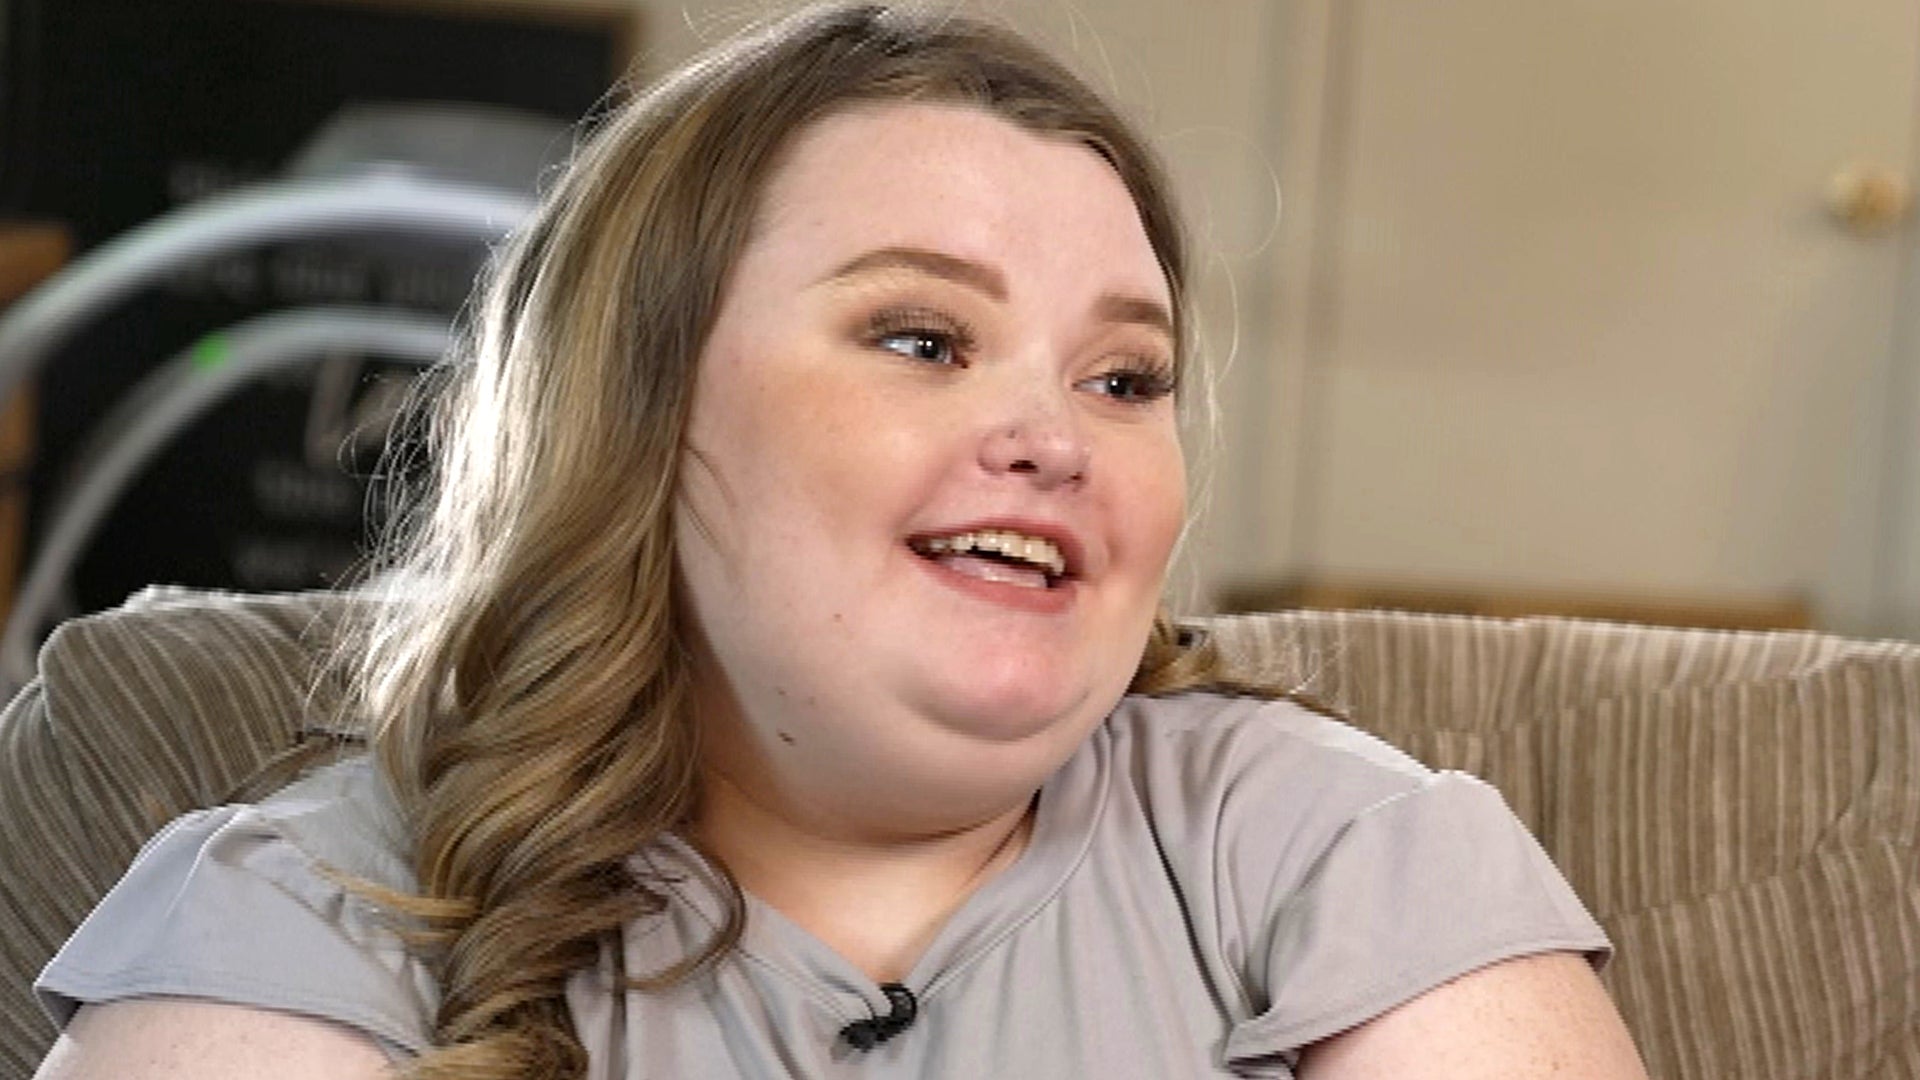 Alana 'Honey Boo Boo' Thompson on Why She's Seriously Considering Weight Loss Surgery (Exclusive) 